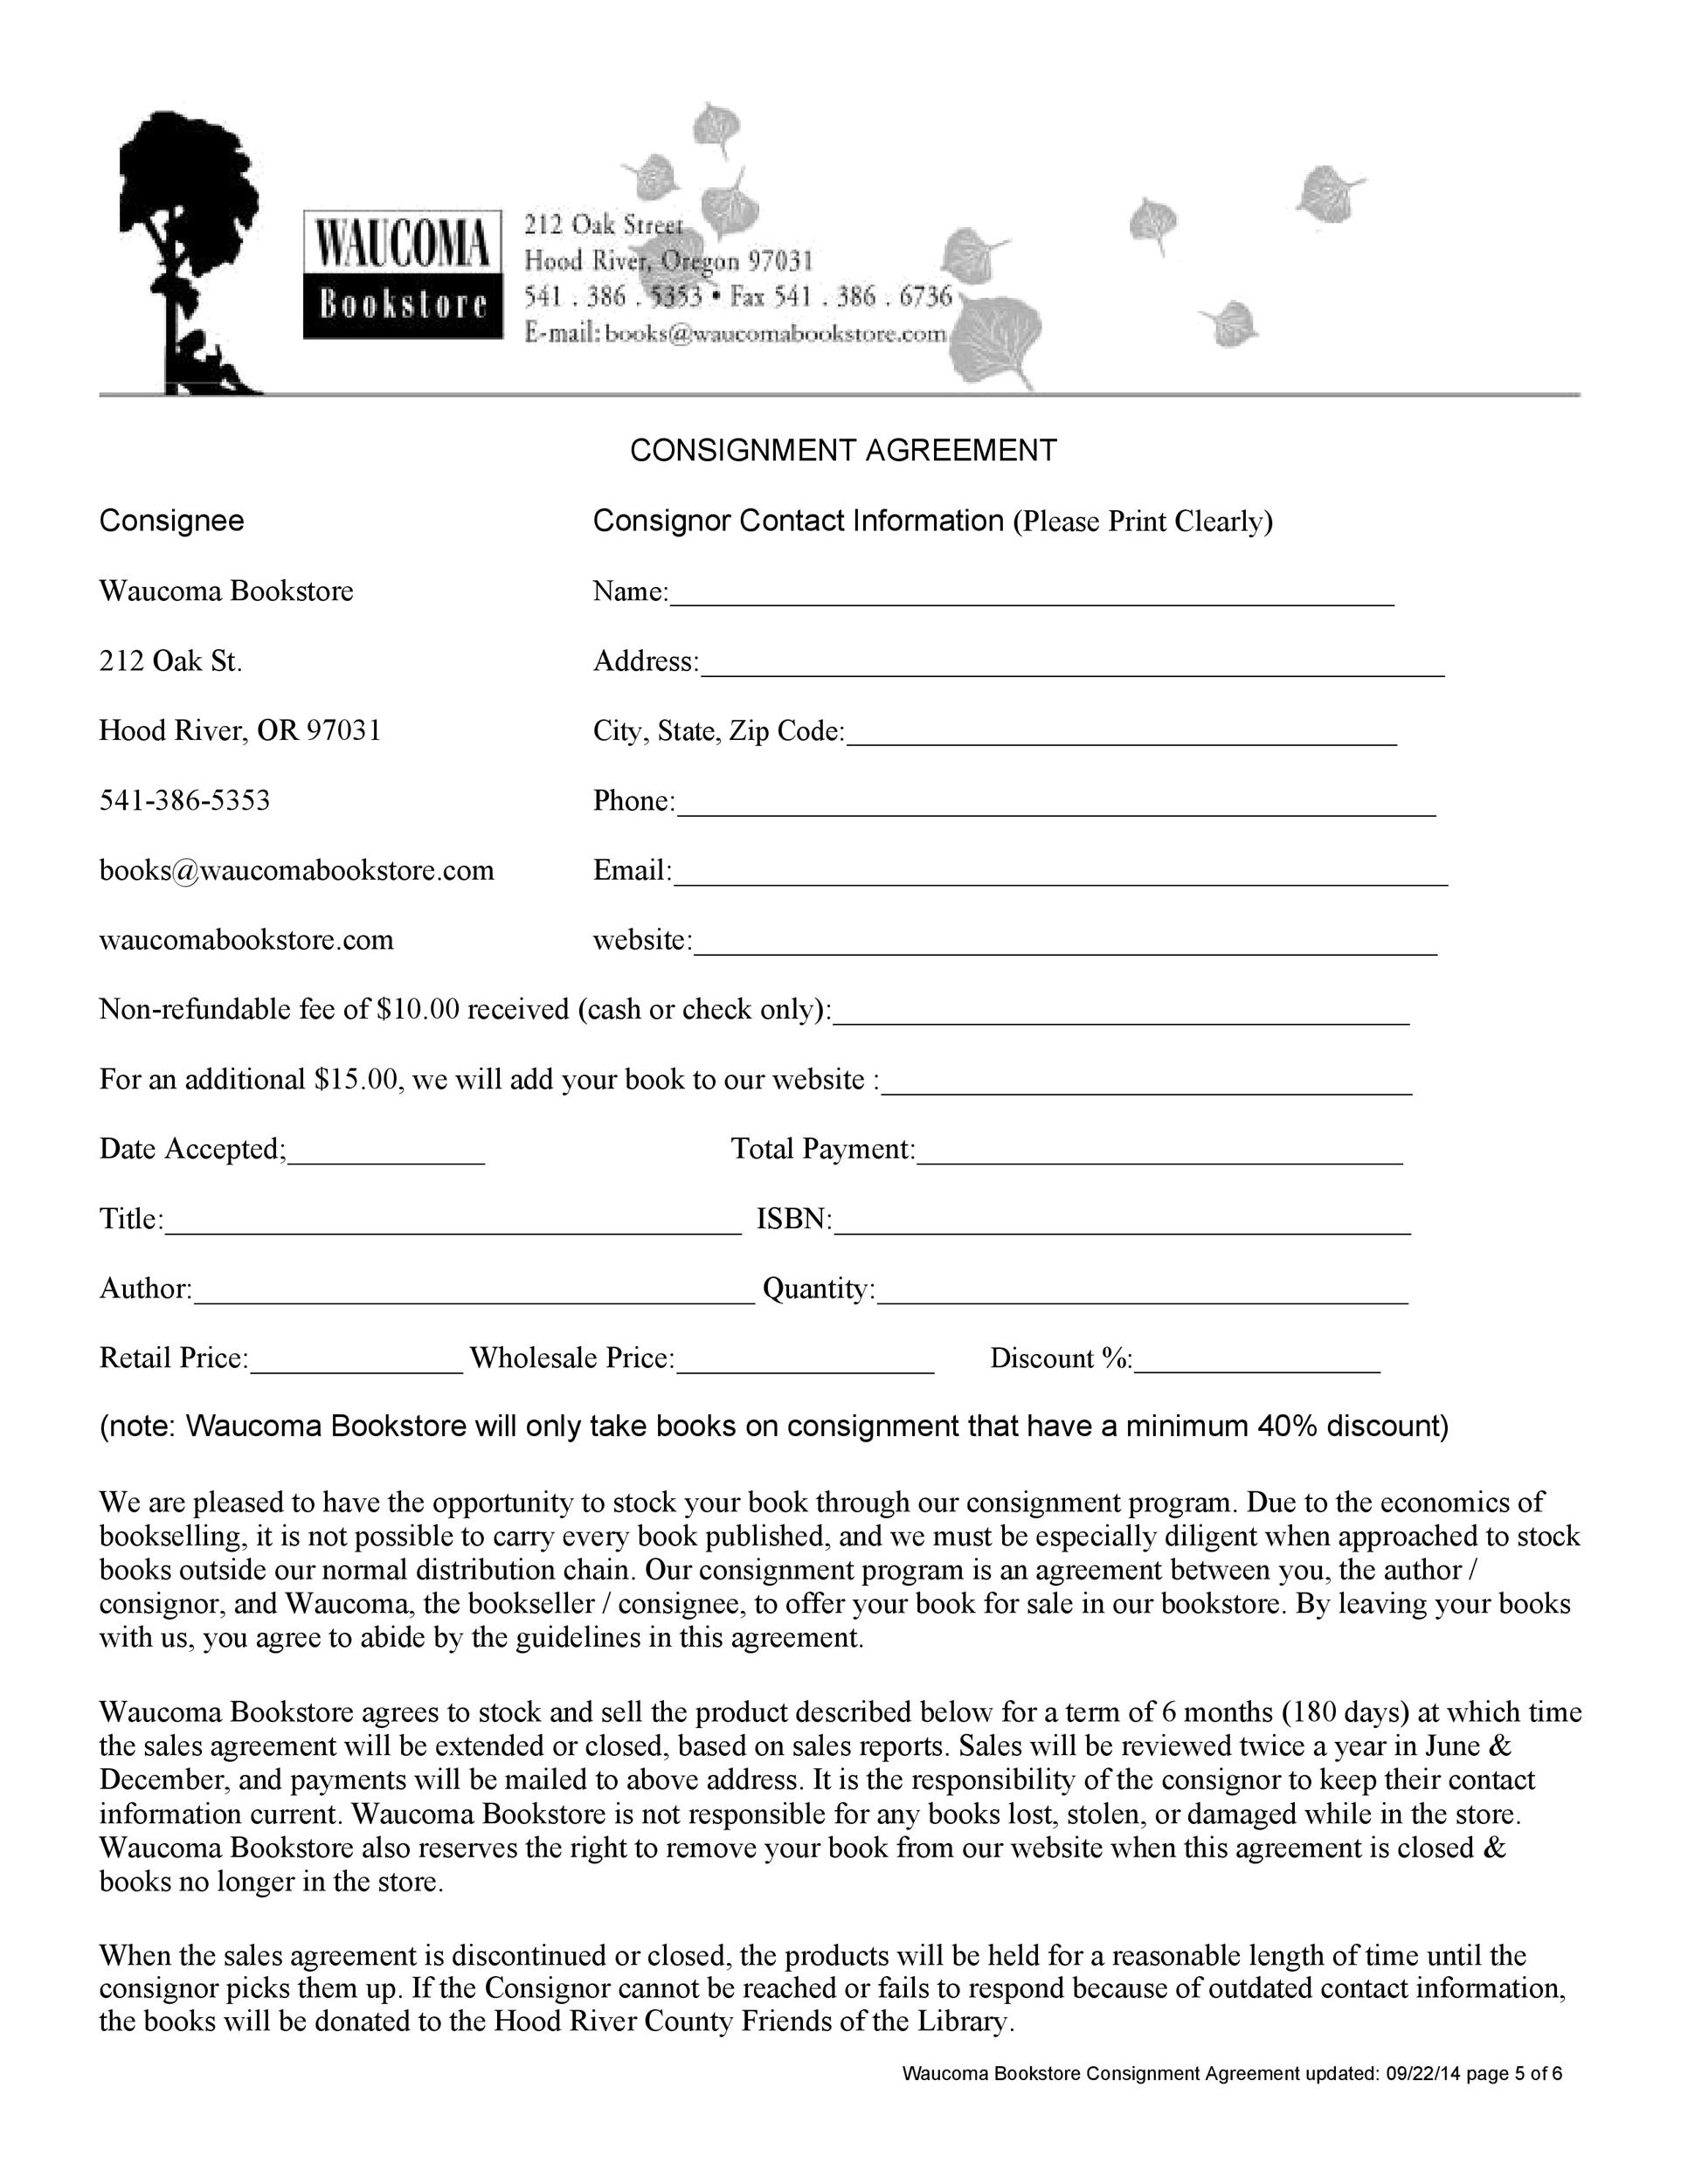 Free Consignment Agreement Template 16